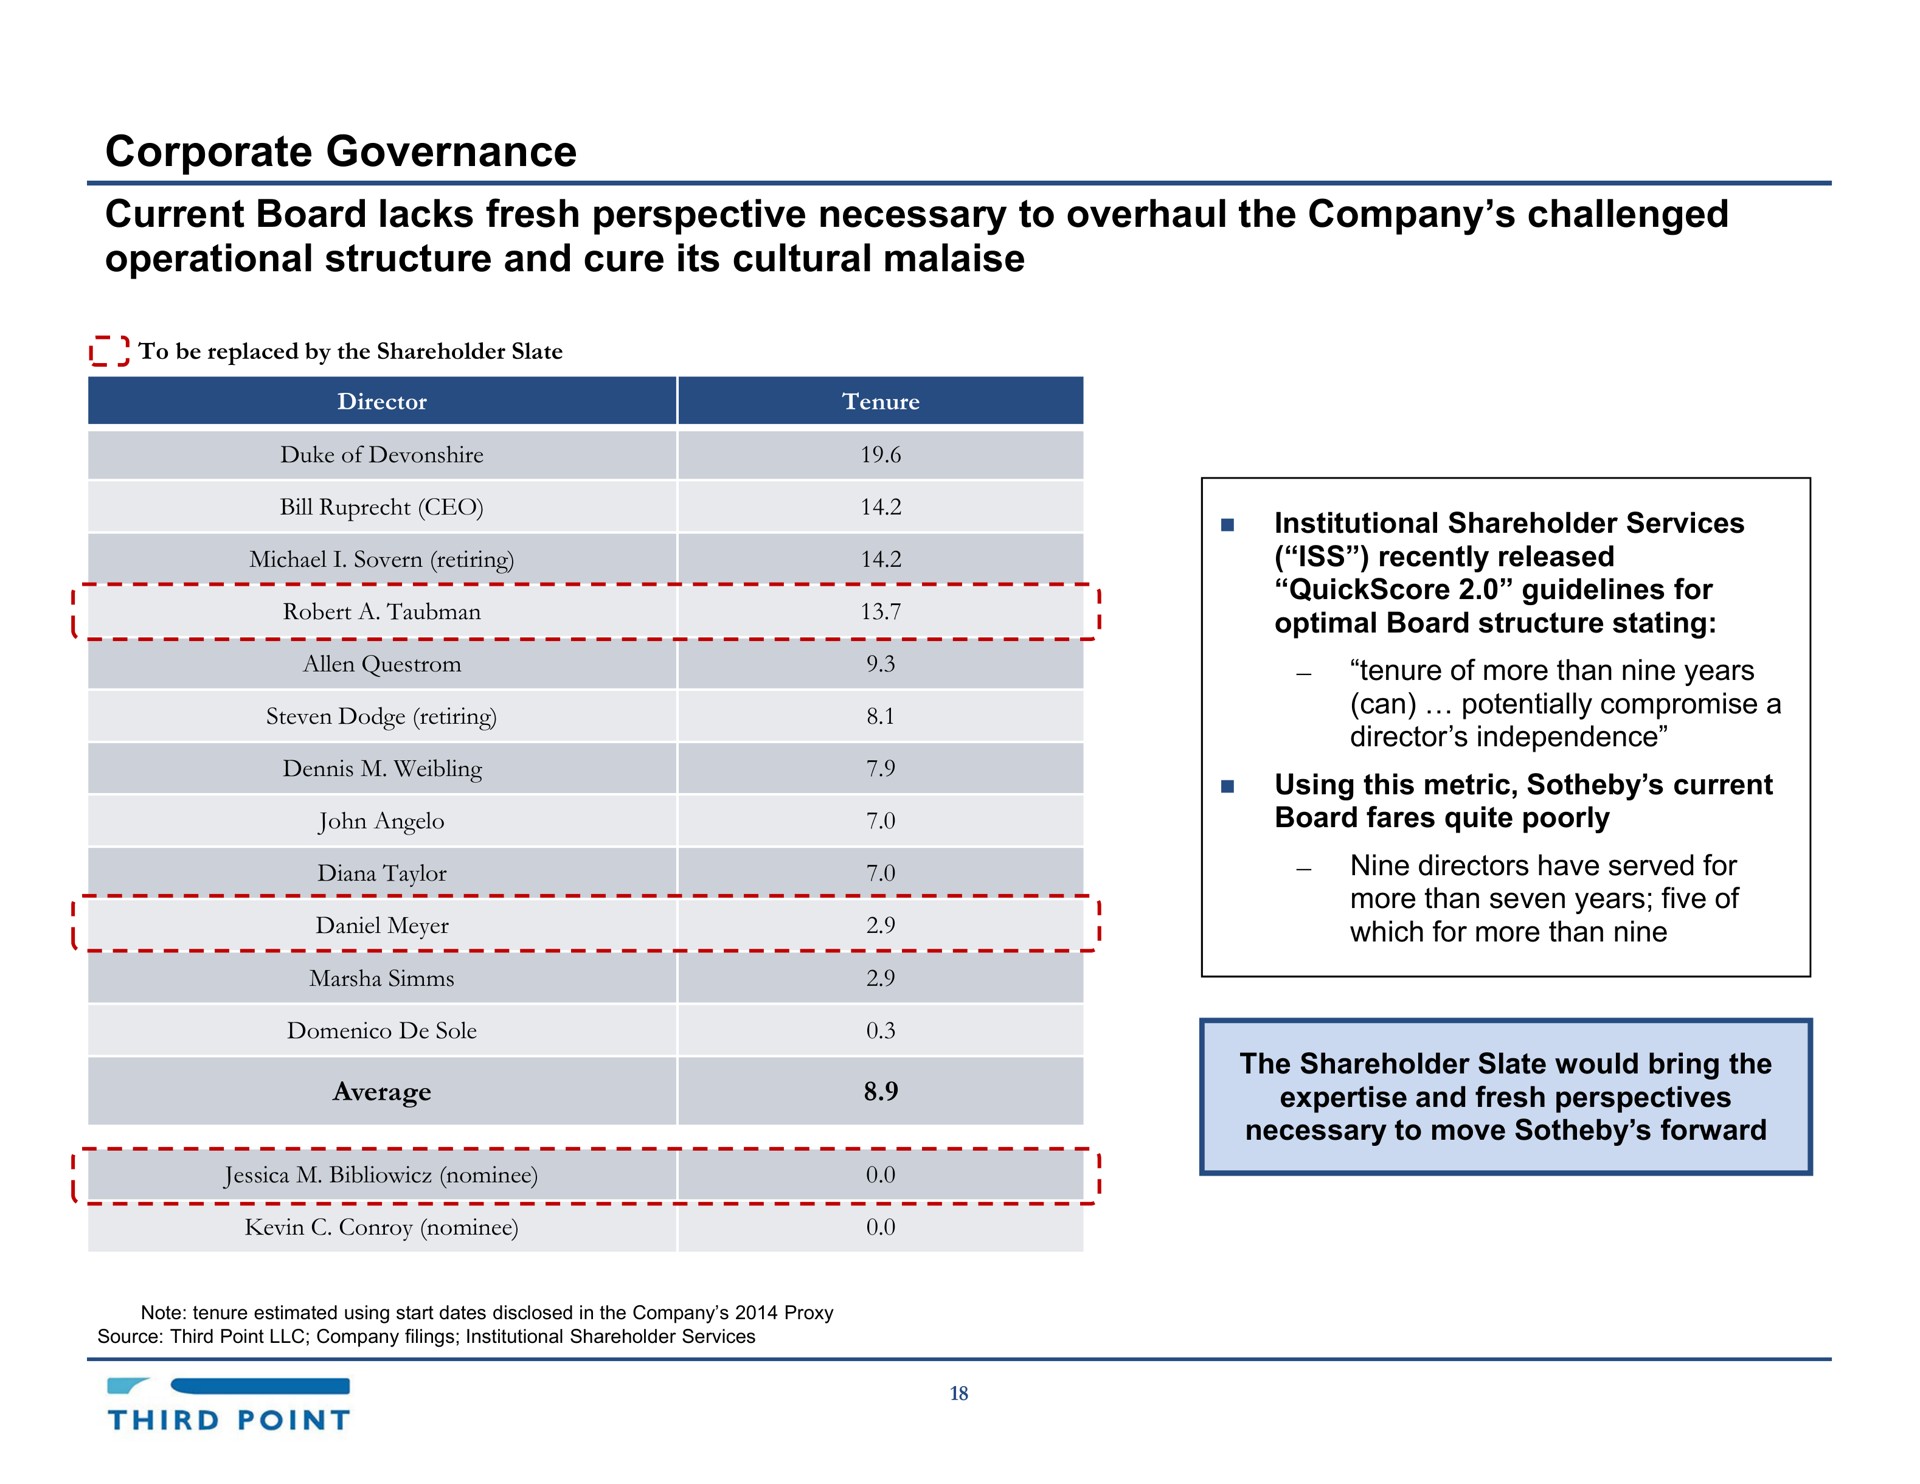 corporate governance current board lacks fresh perspective necessary to overhaul the company challenged operational structure and cure its cultural malaise | Third Point Management